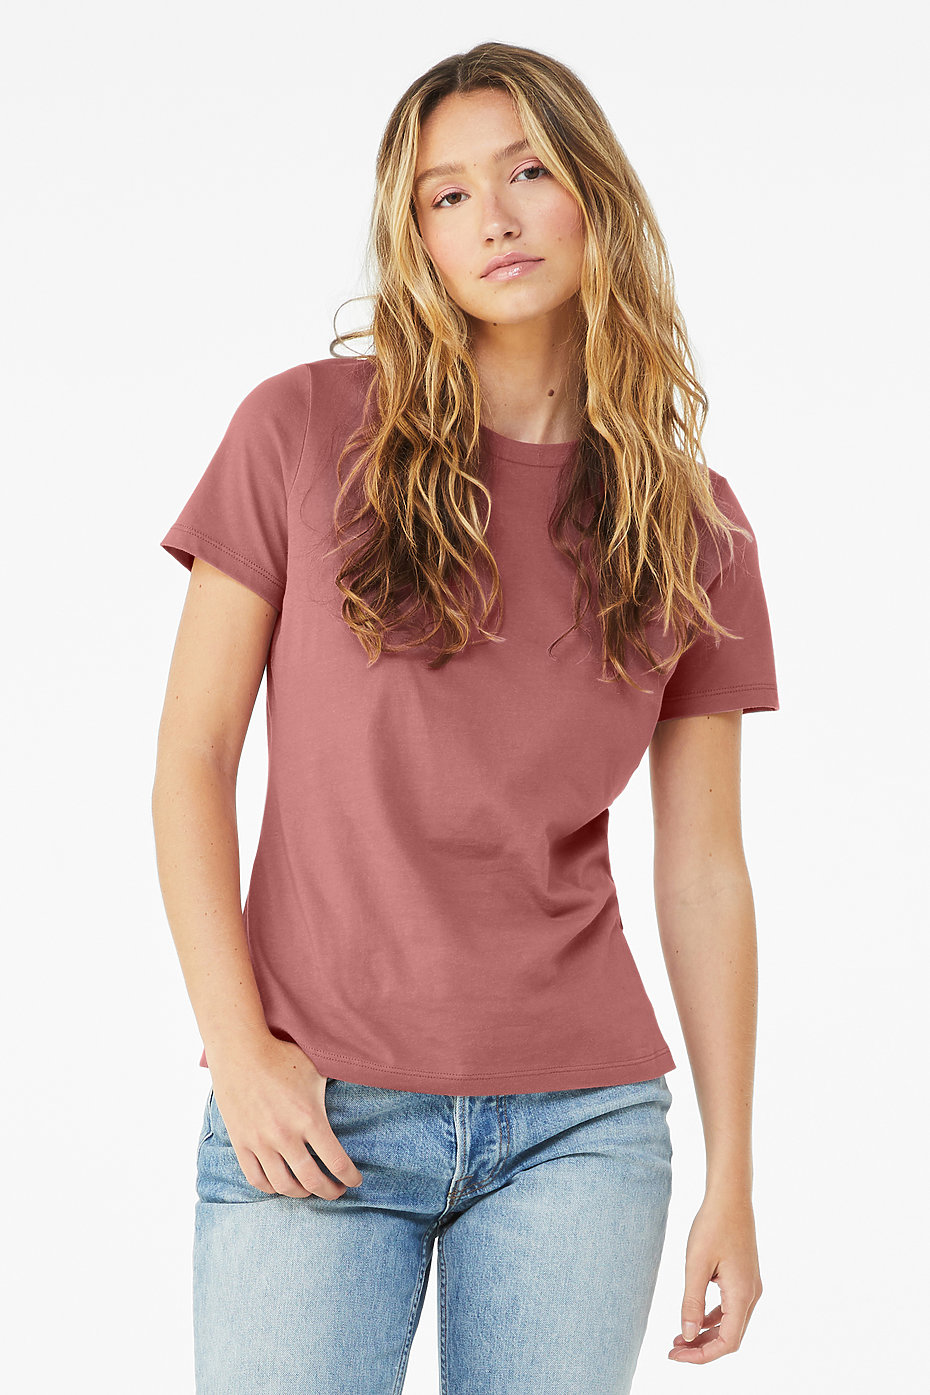 Women's Relaxed Jersey S/S Tee